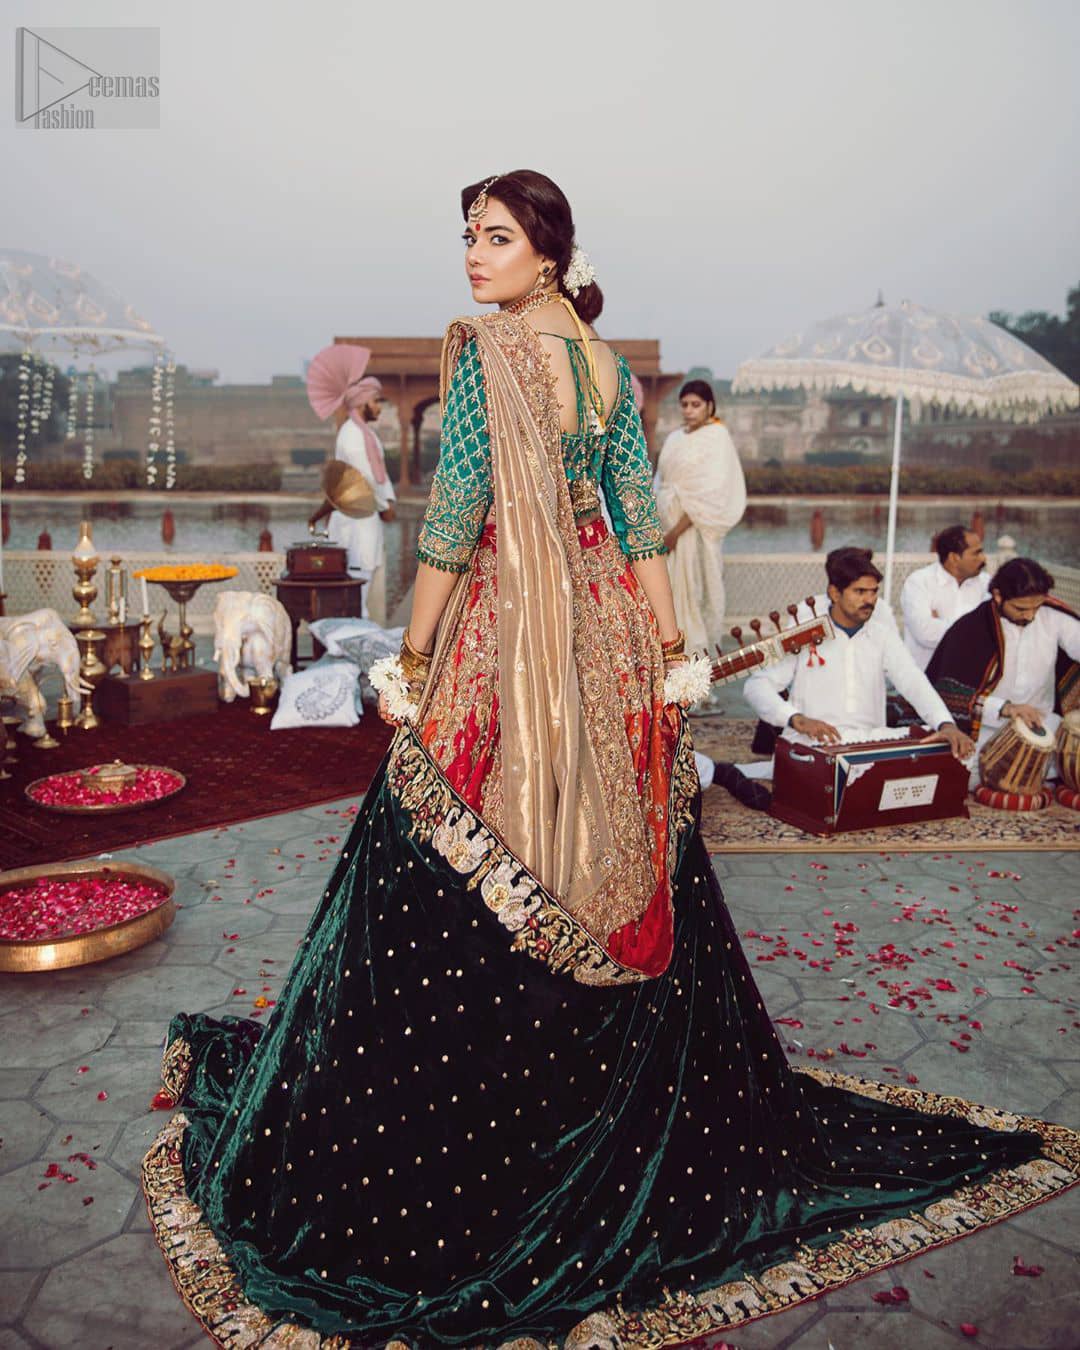 Classic, timeless and truly beautiful, our bridal dress is perfect for your unforgettable day. Excellence of craftsmanship is evident with intricate detailing that features the use of zardozi work. The blouse is beautifully adorned with geometric patterns and floral embroidery with golden zardozi work and finished with dangling beads. Complete the look with artfully coordinated lehenga which is ornamented with a bold and captivating design with a traditional intricate embroidery and scattered tiny floral motifs. The combination of red and orange for lehenga is also captivating. Elegance is personified when it gets paired up with golden dupatta having four sided embroidered border.